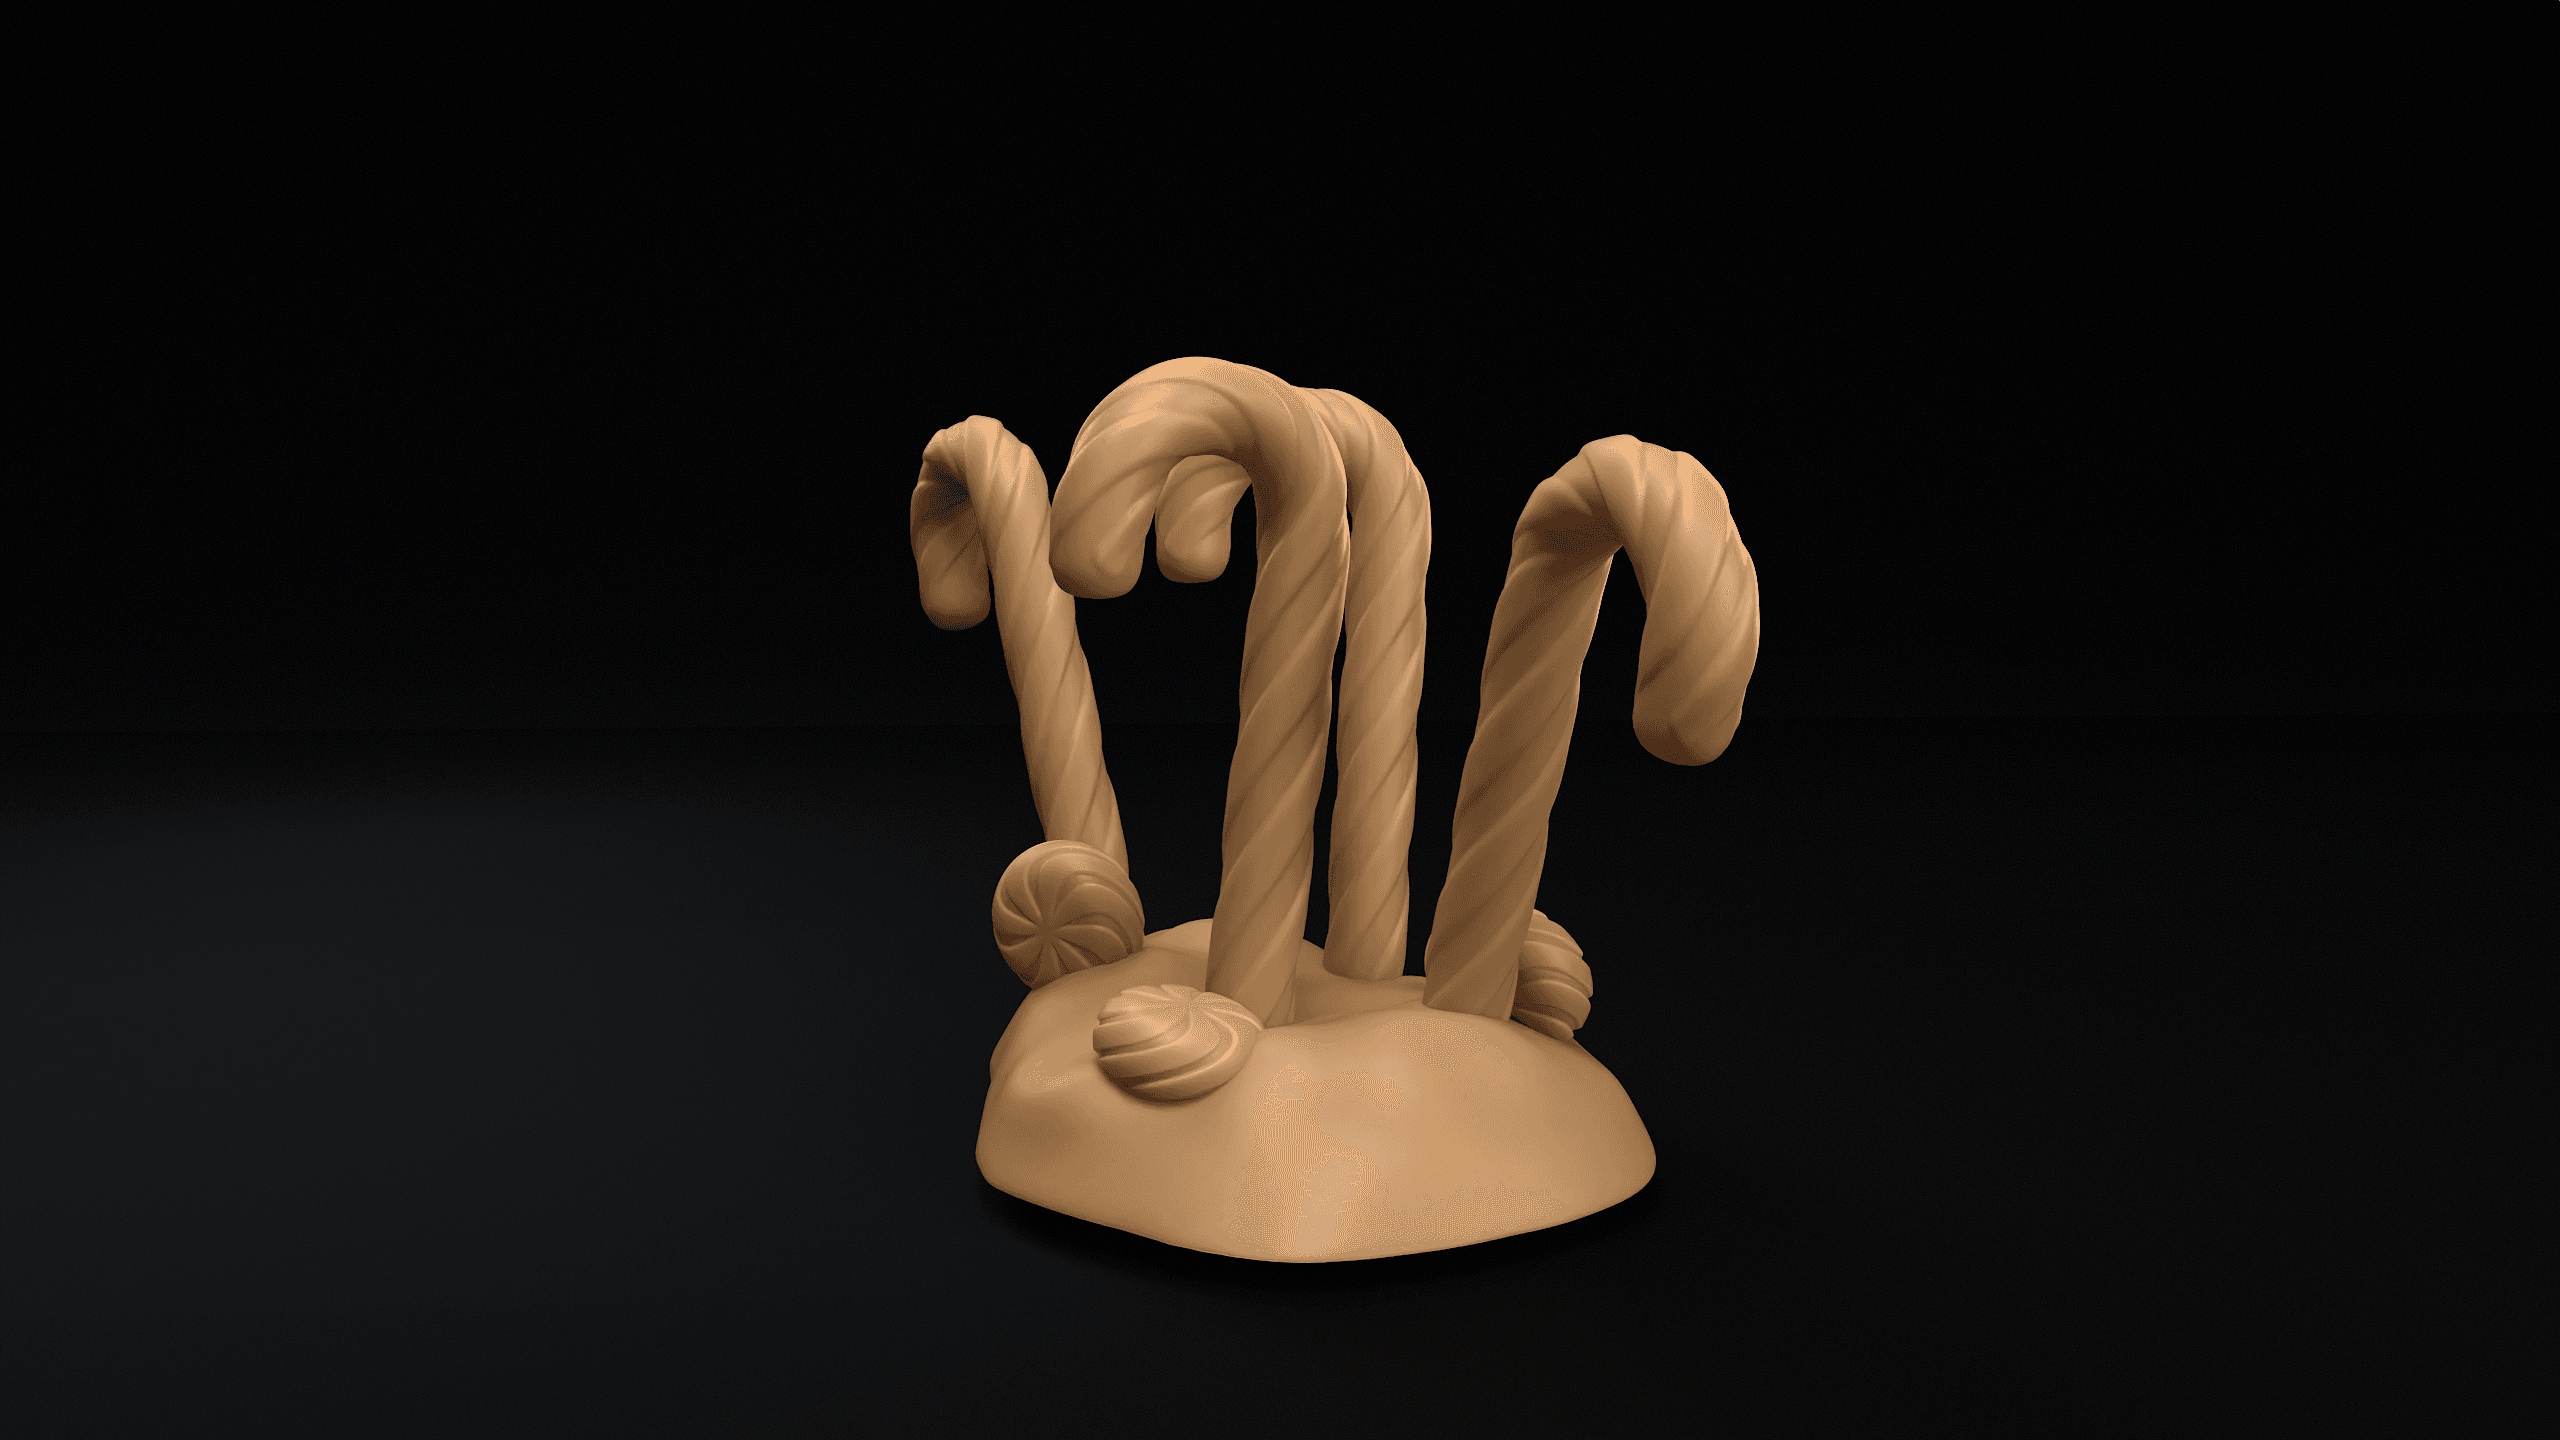 Candy Canes A 3d model